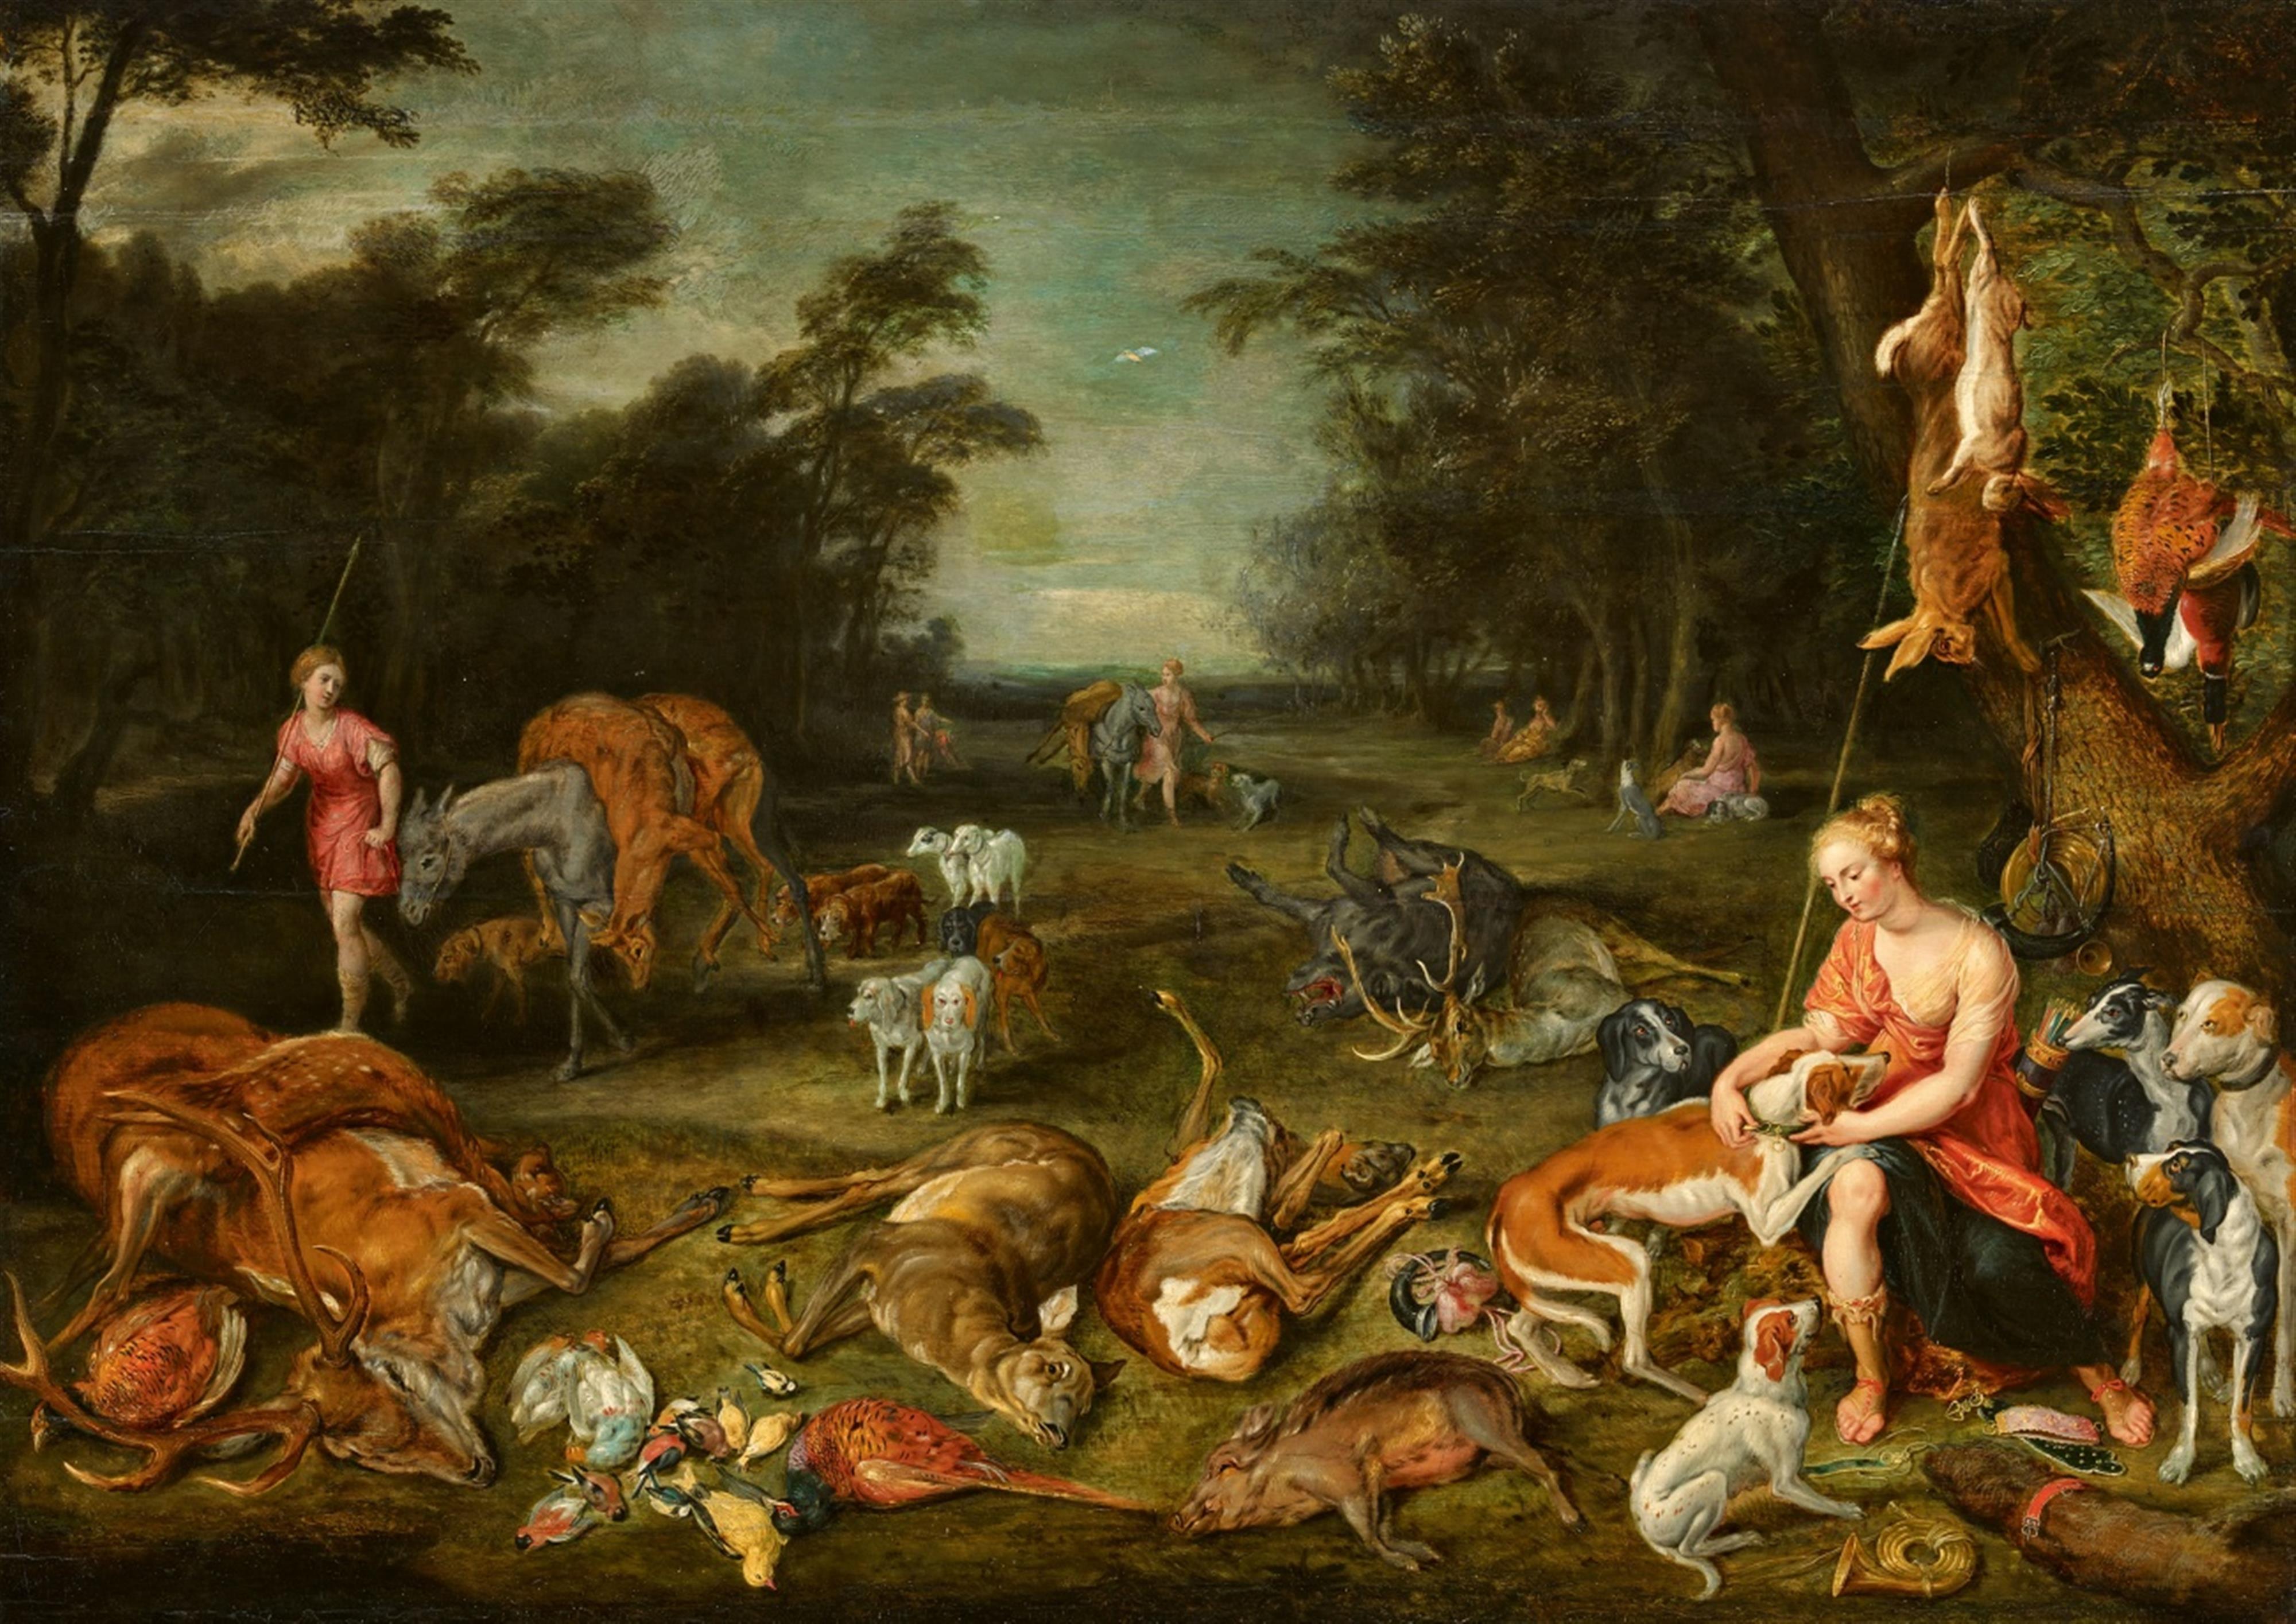 Jan Brueghel the Younger, circle of
Hendrick van Balen, circle of - Landscape with Diana after the Hunt - image-1